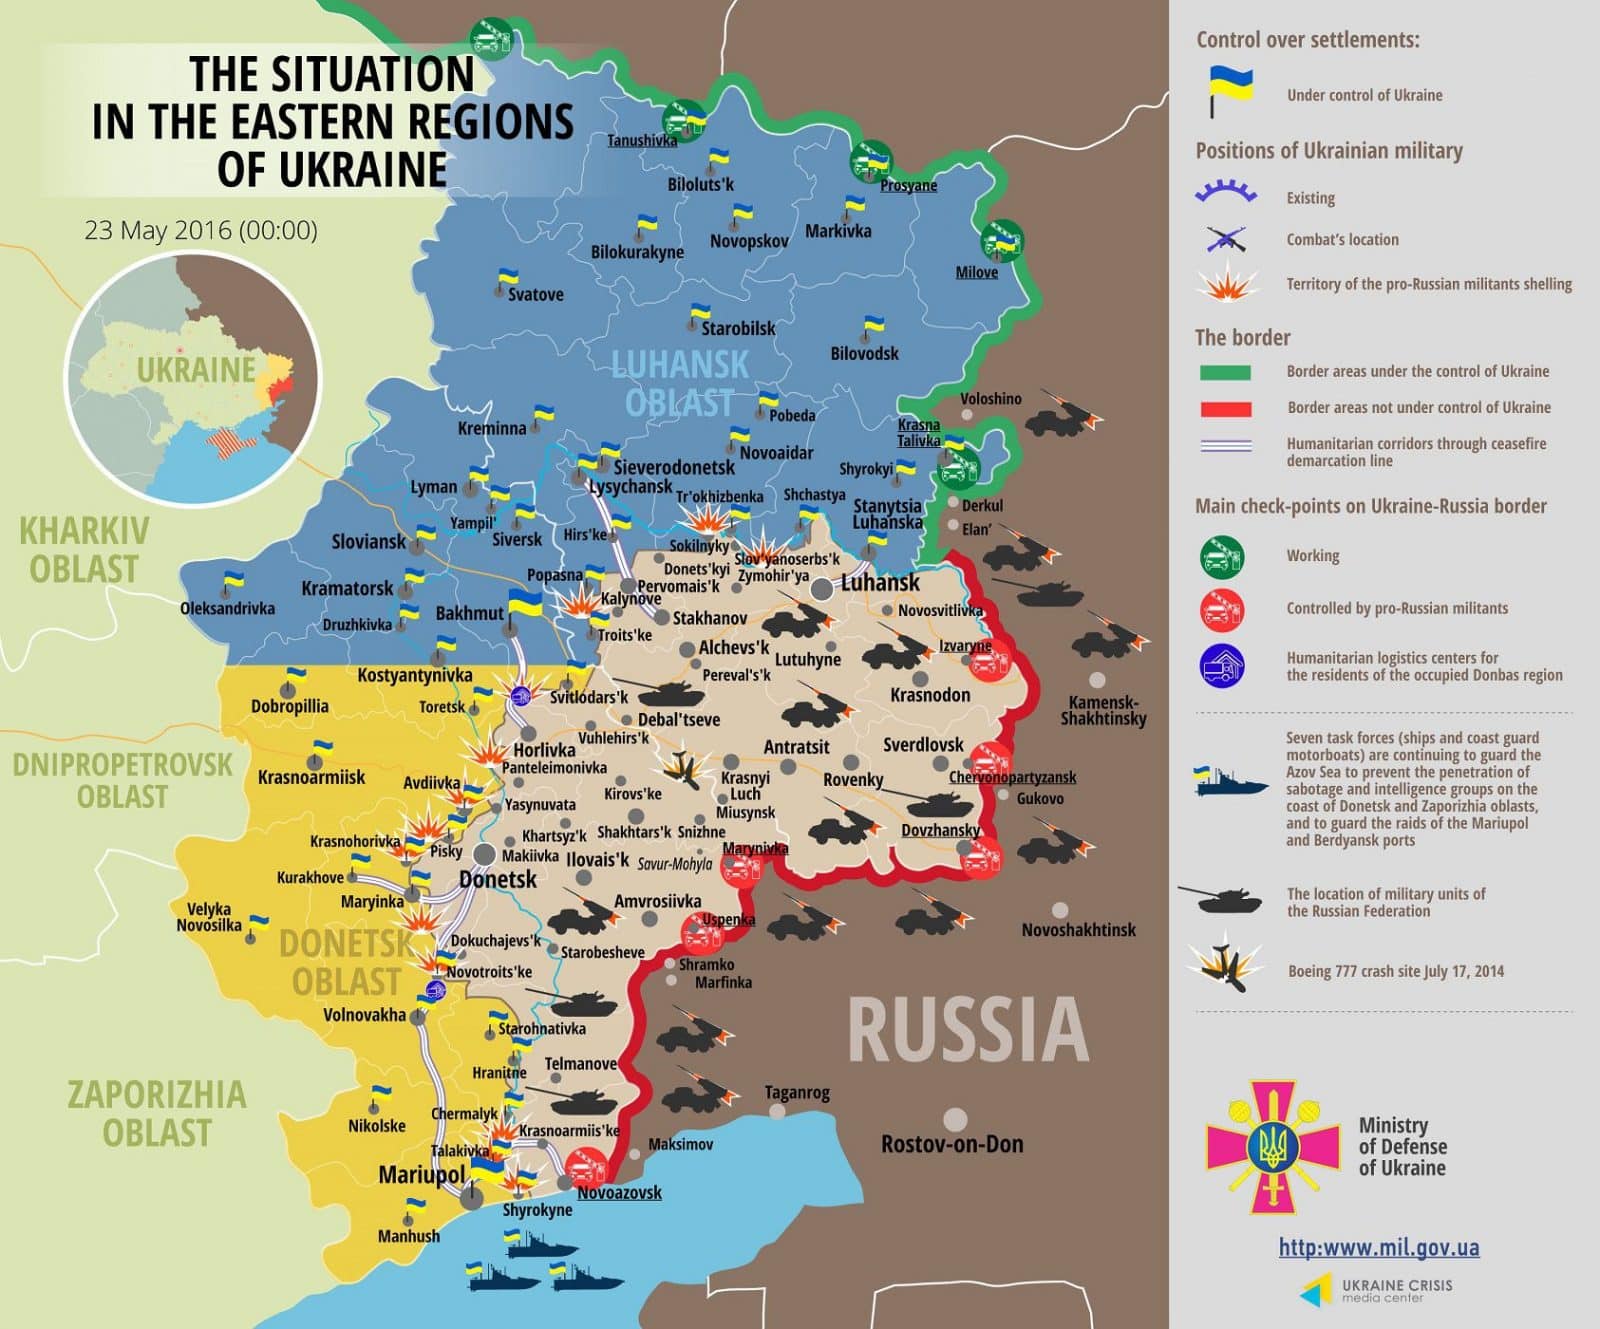 7 Ukrainian soldiers killed, 9 wounded, Russian troops attack Ukraine forces 47 times last day